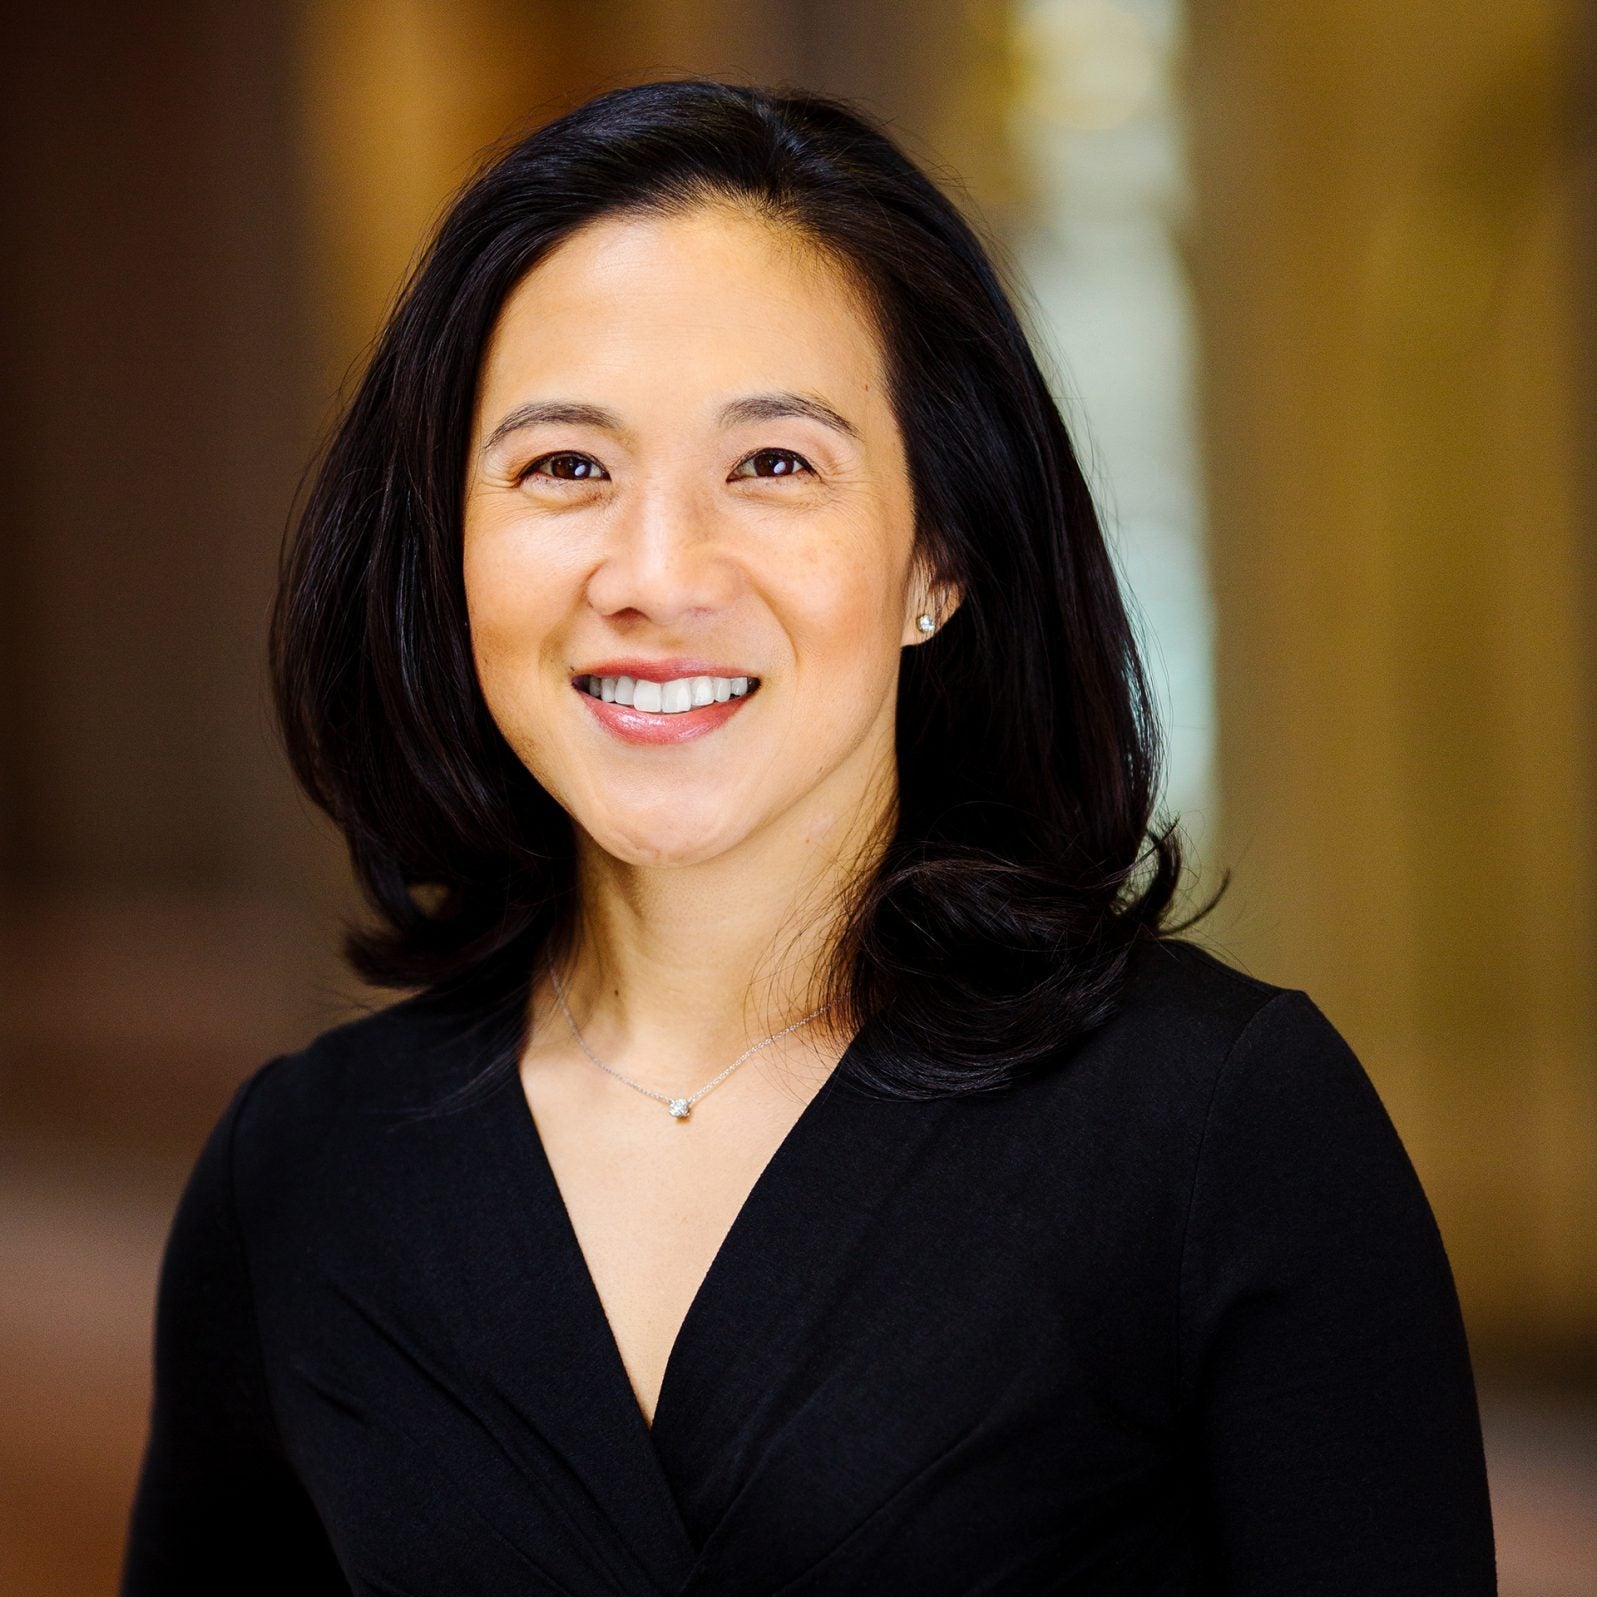 Angela Duckworth on Developing a Passion and Making Your Life Matter